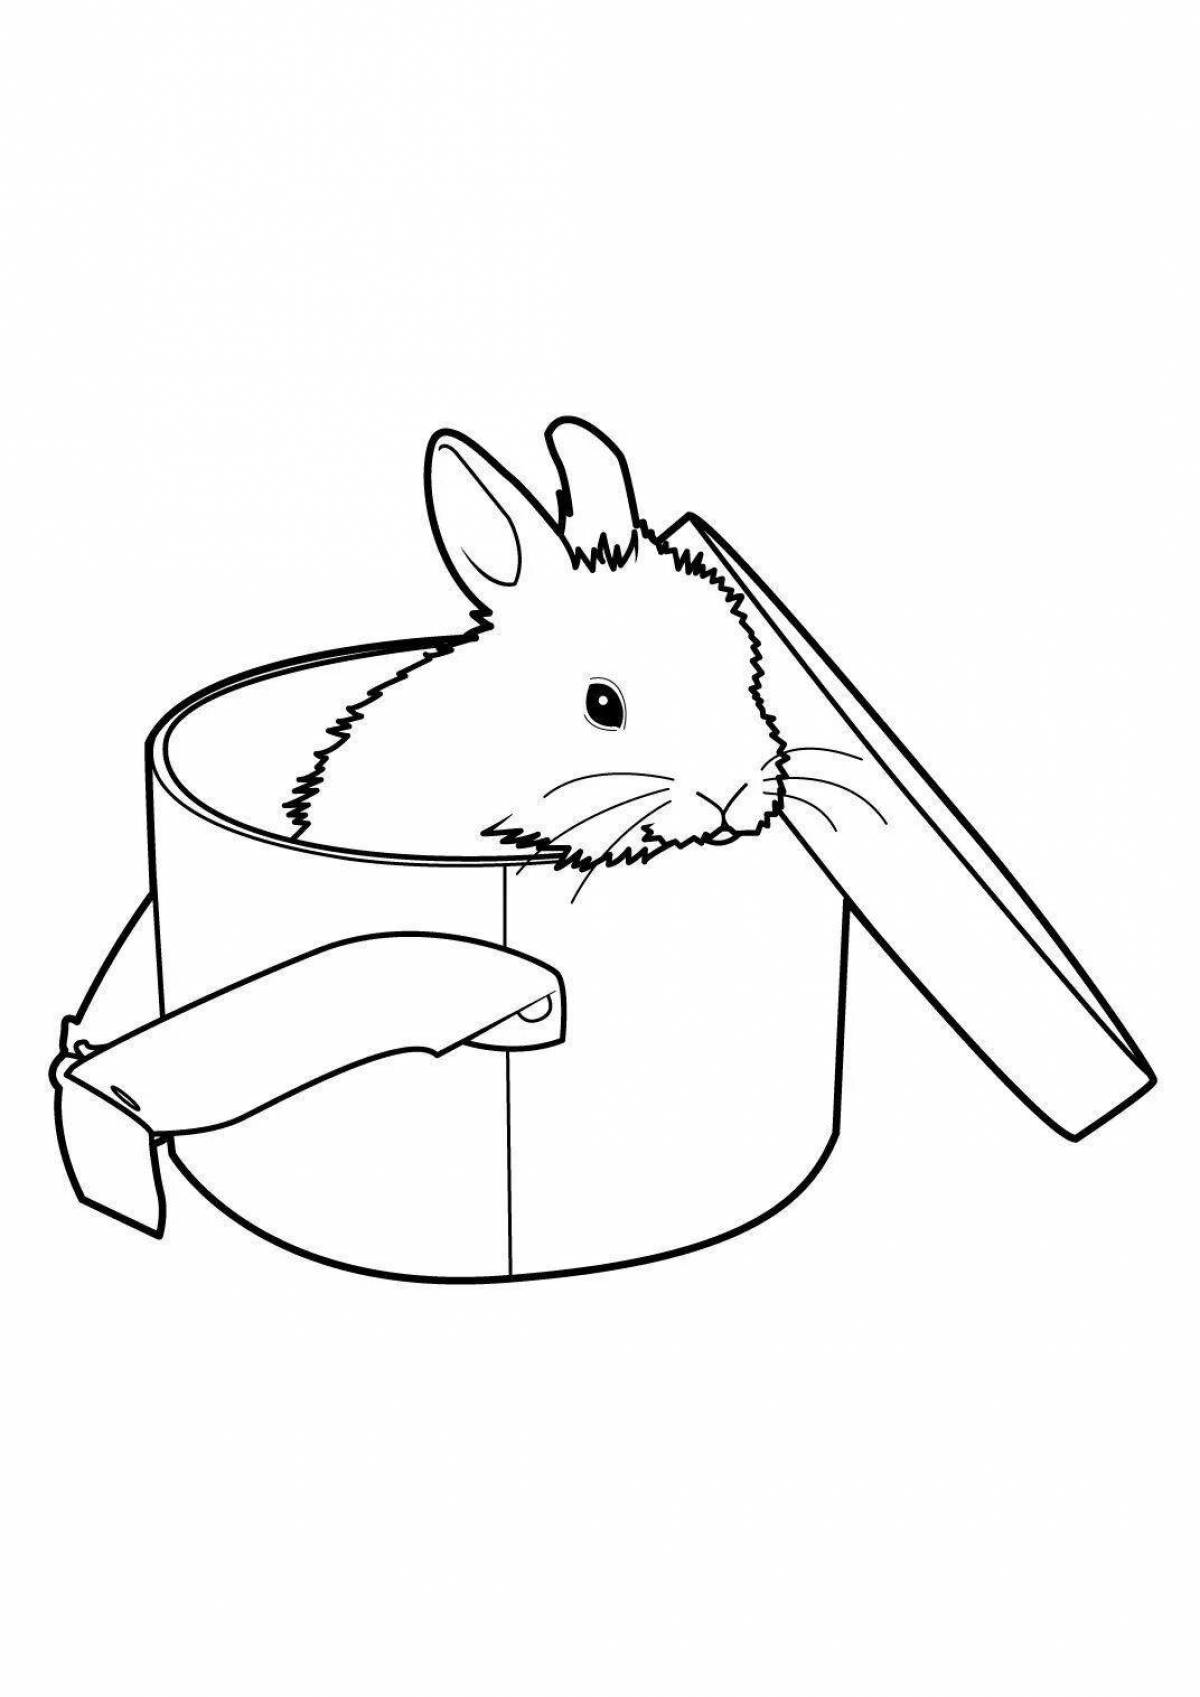 Happy rabbit and cat coloring book